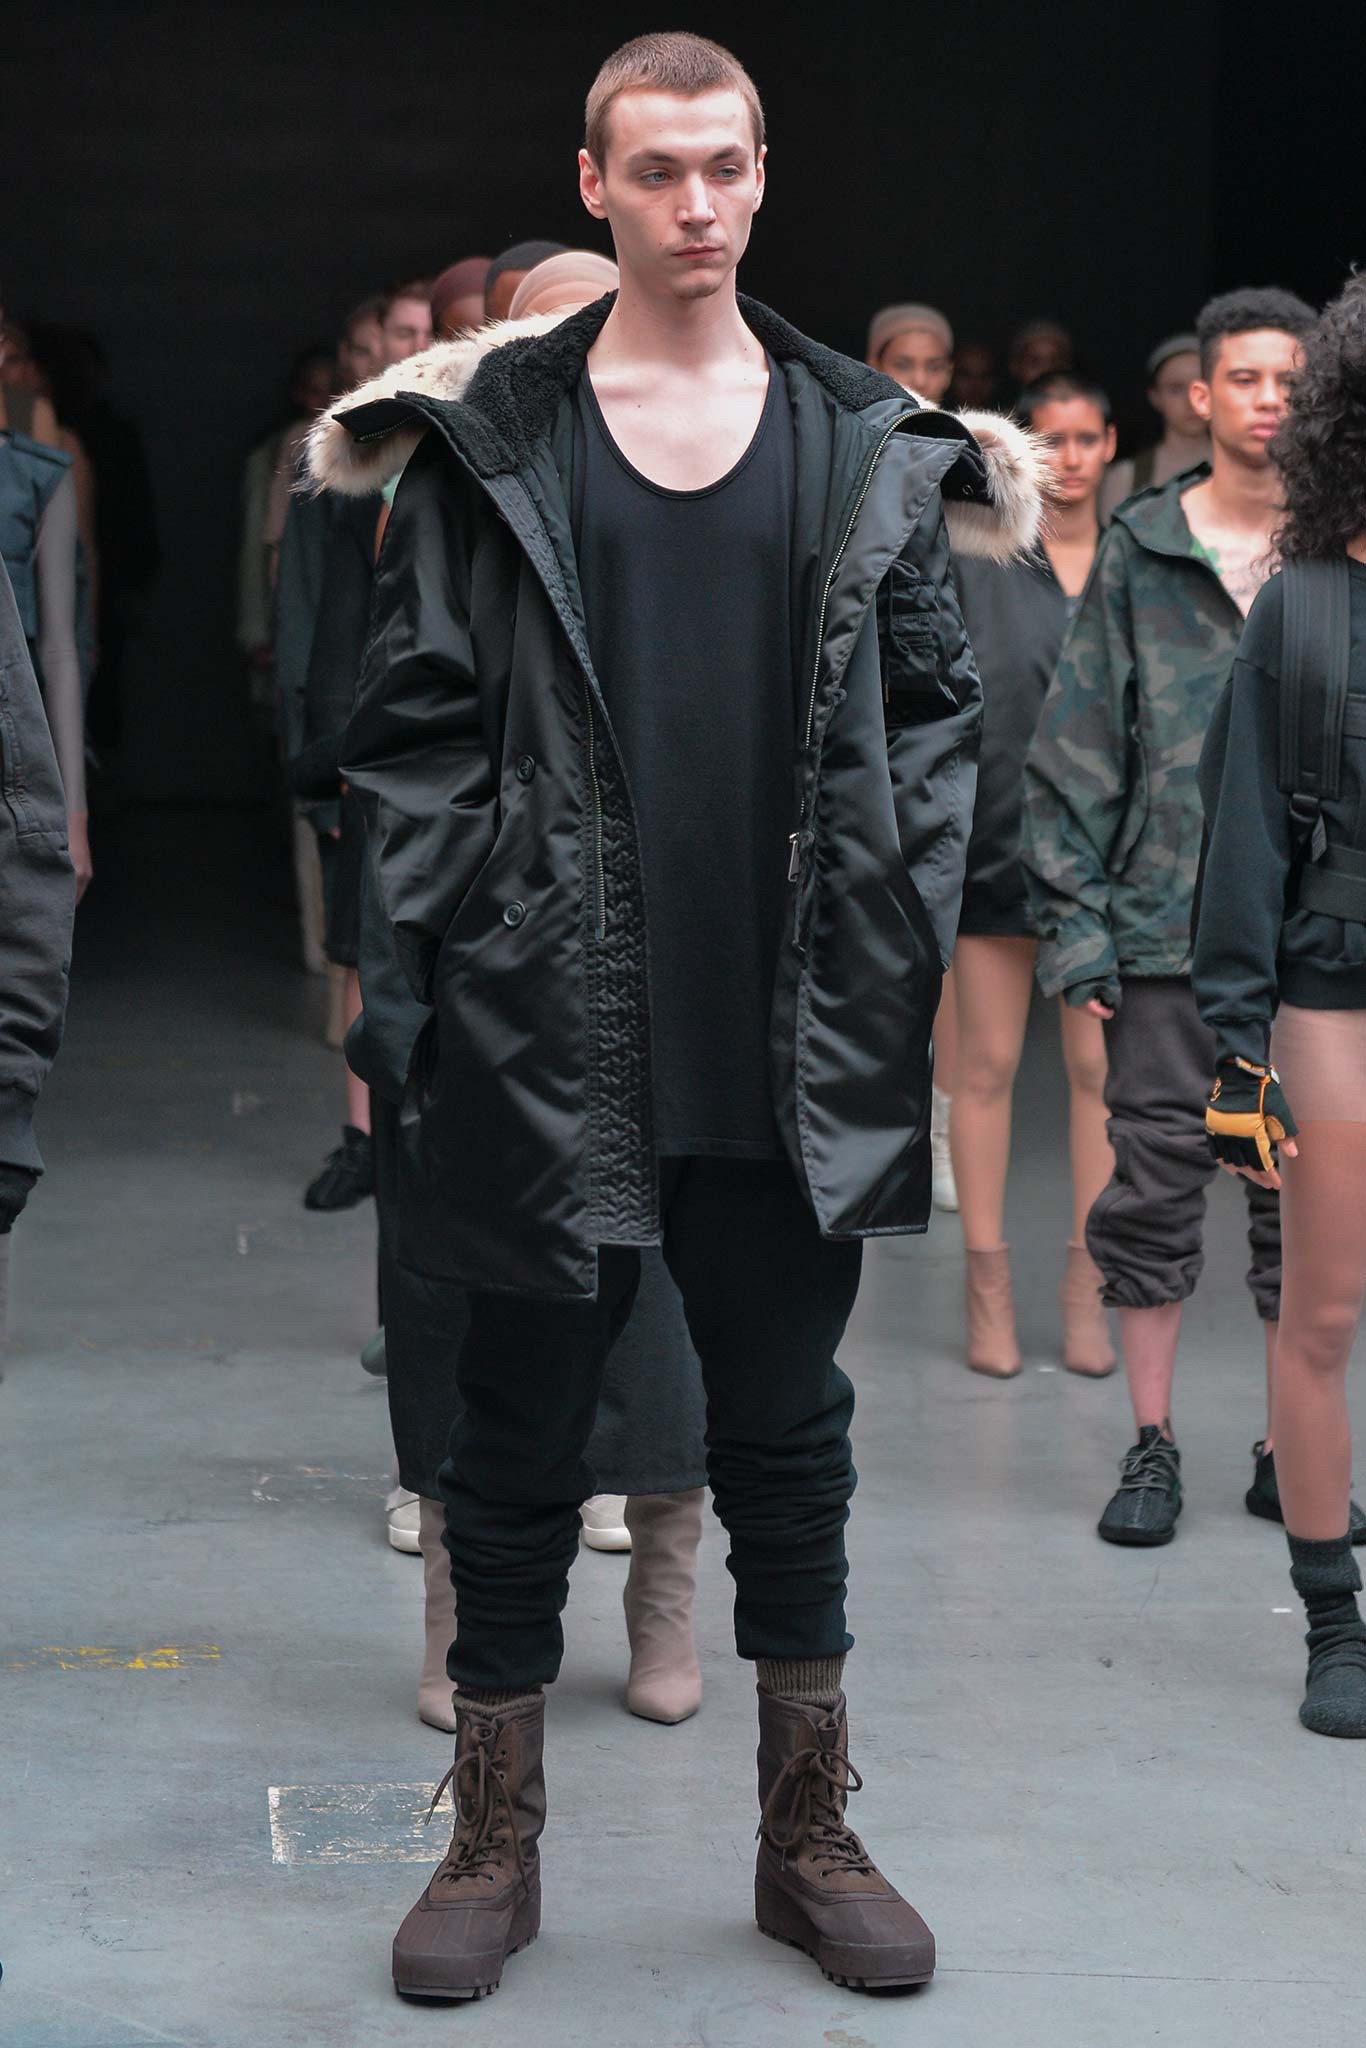 Kanye West for Adidas Fall/Winter 2015